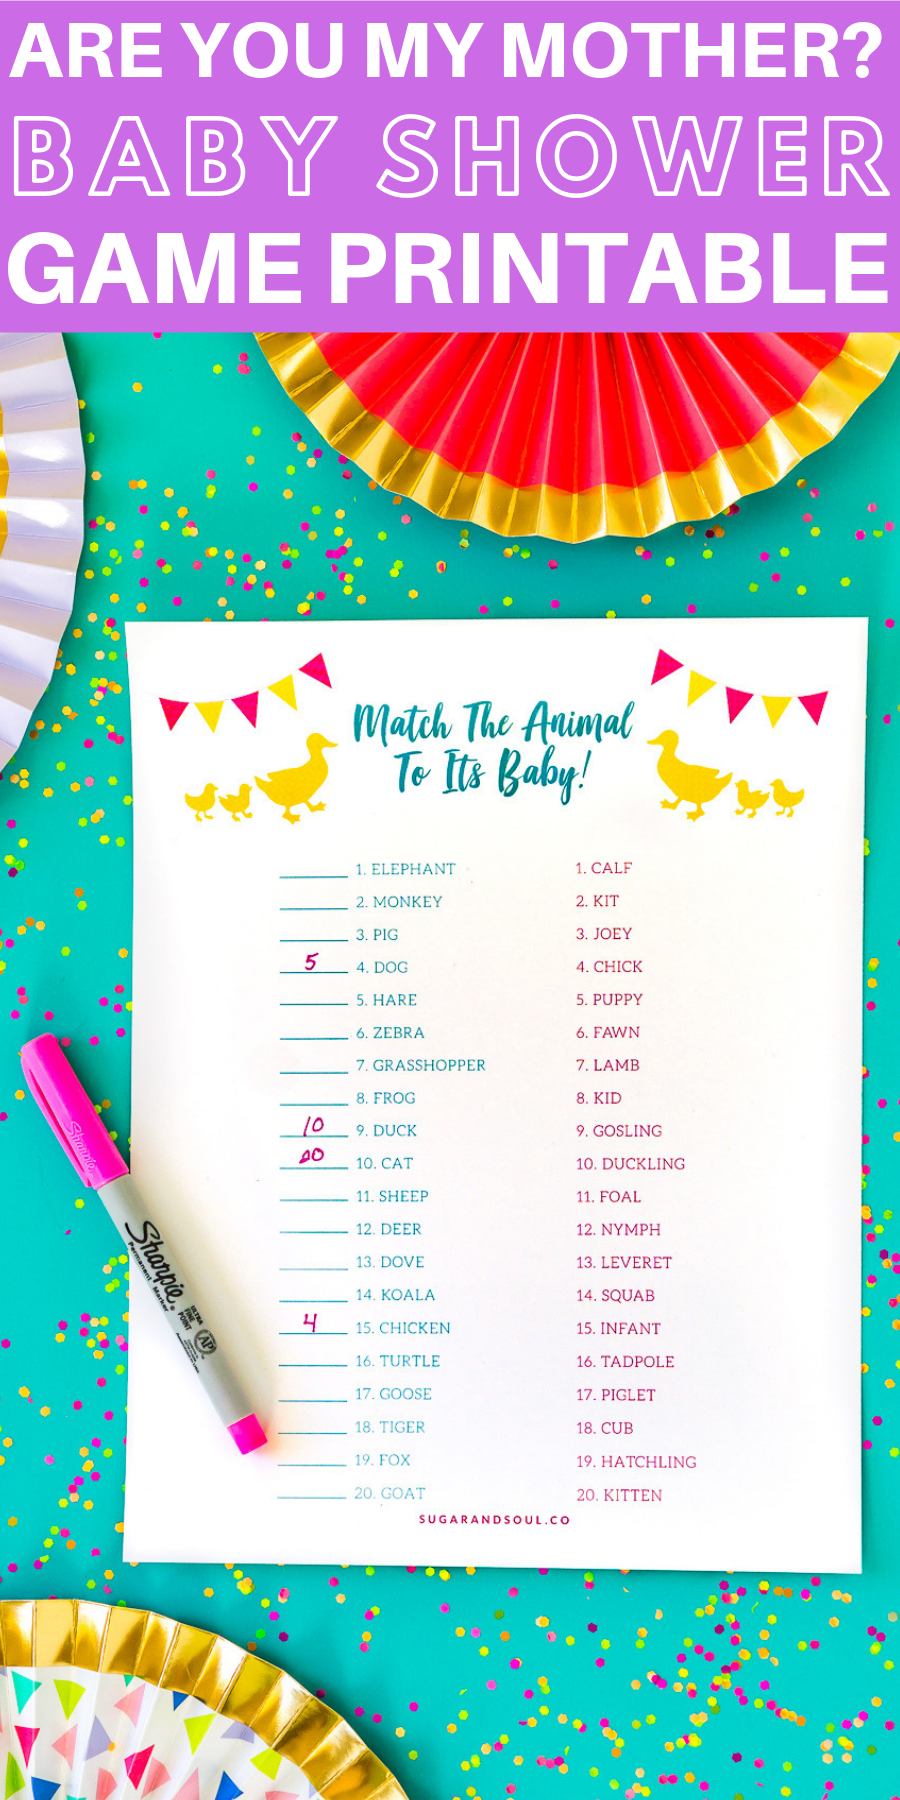 This Are You My Mother? Baby Shower Game Printable is a classic party game with even more animals and is always a hit! Match each animal to it's baby!